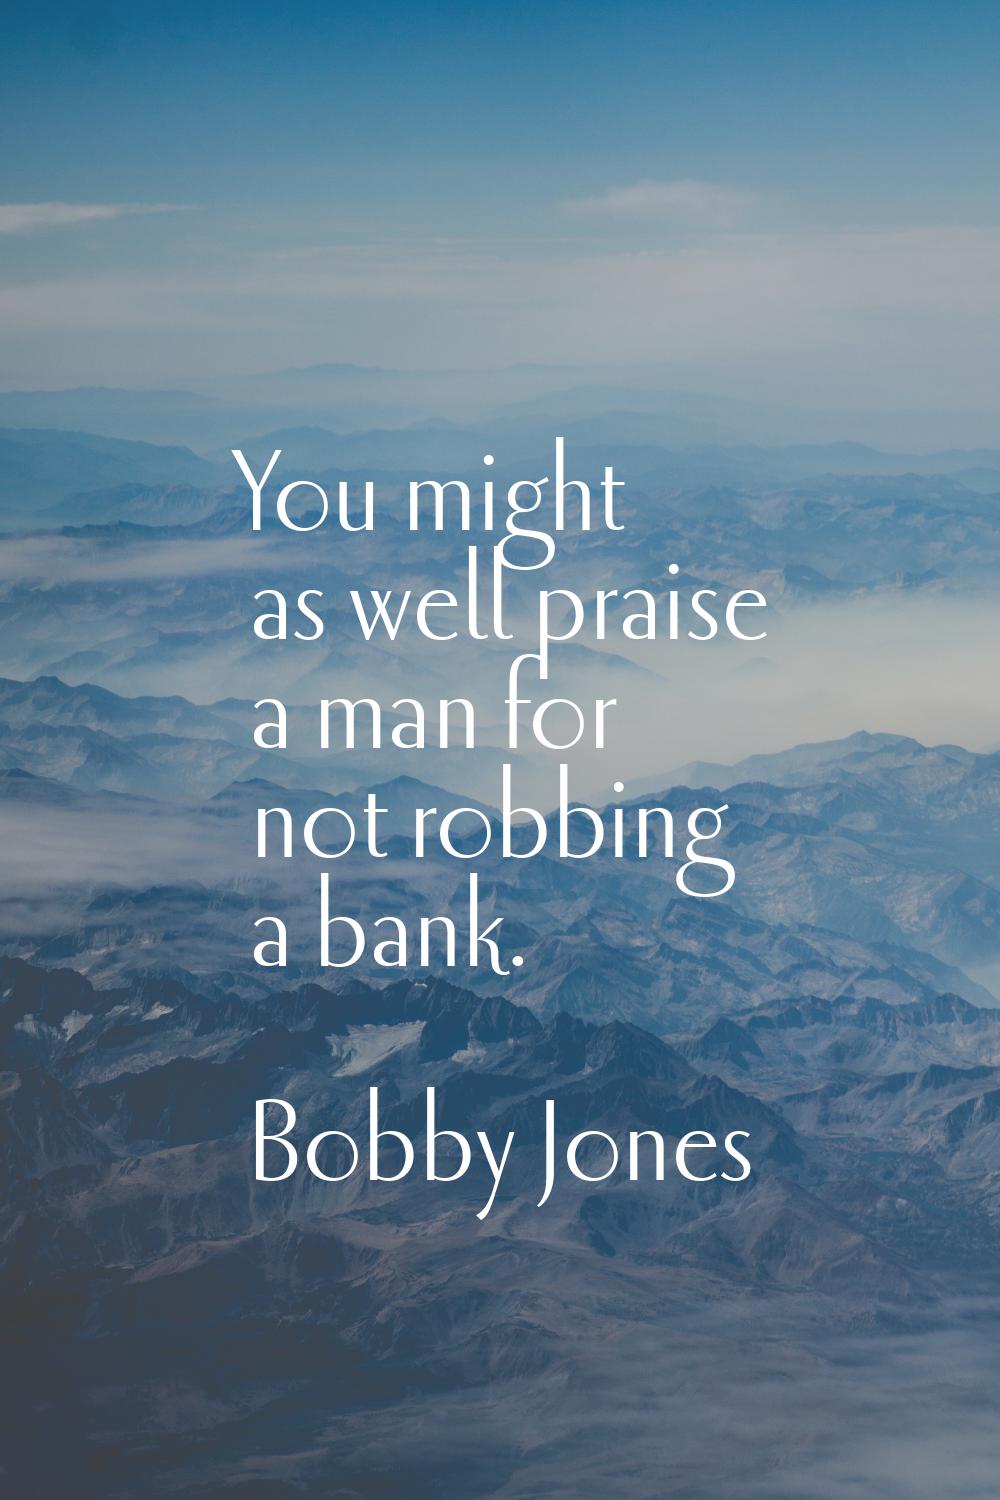 You might as well praise a man for not robbing a bank.